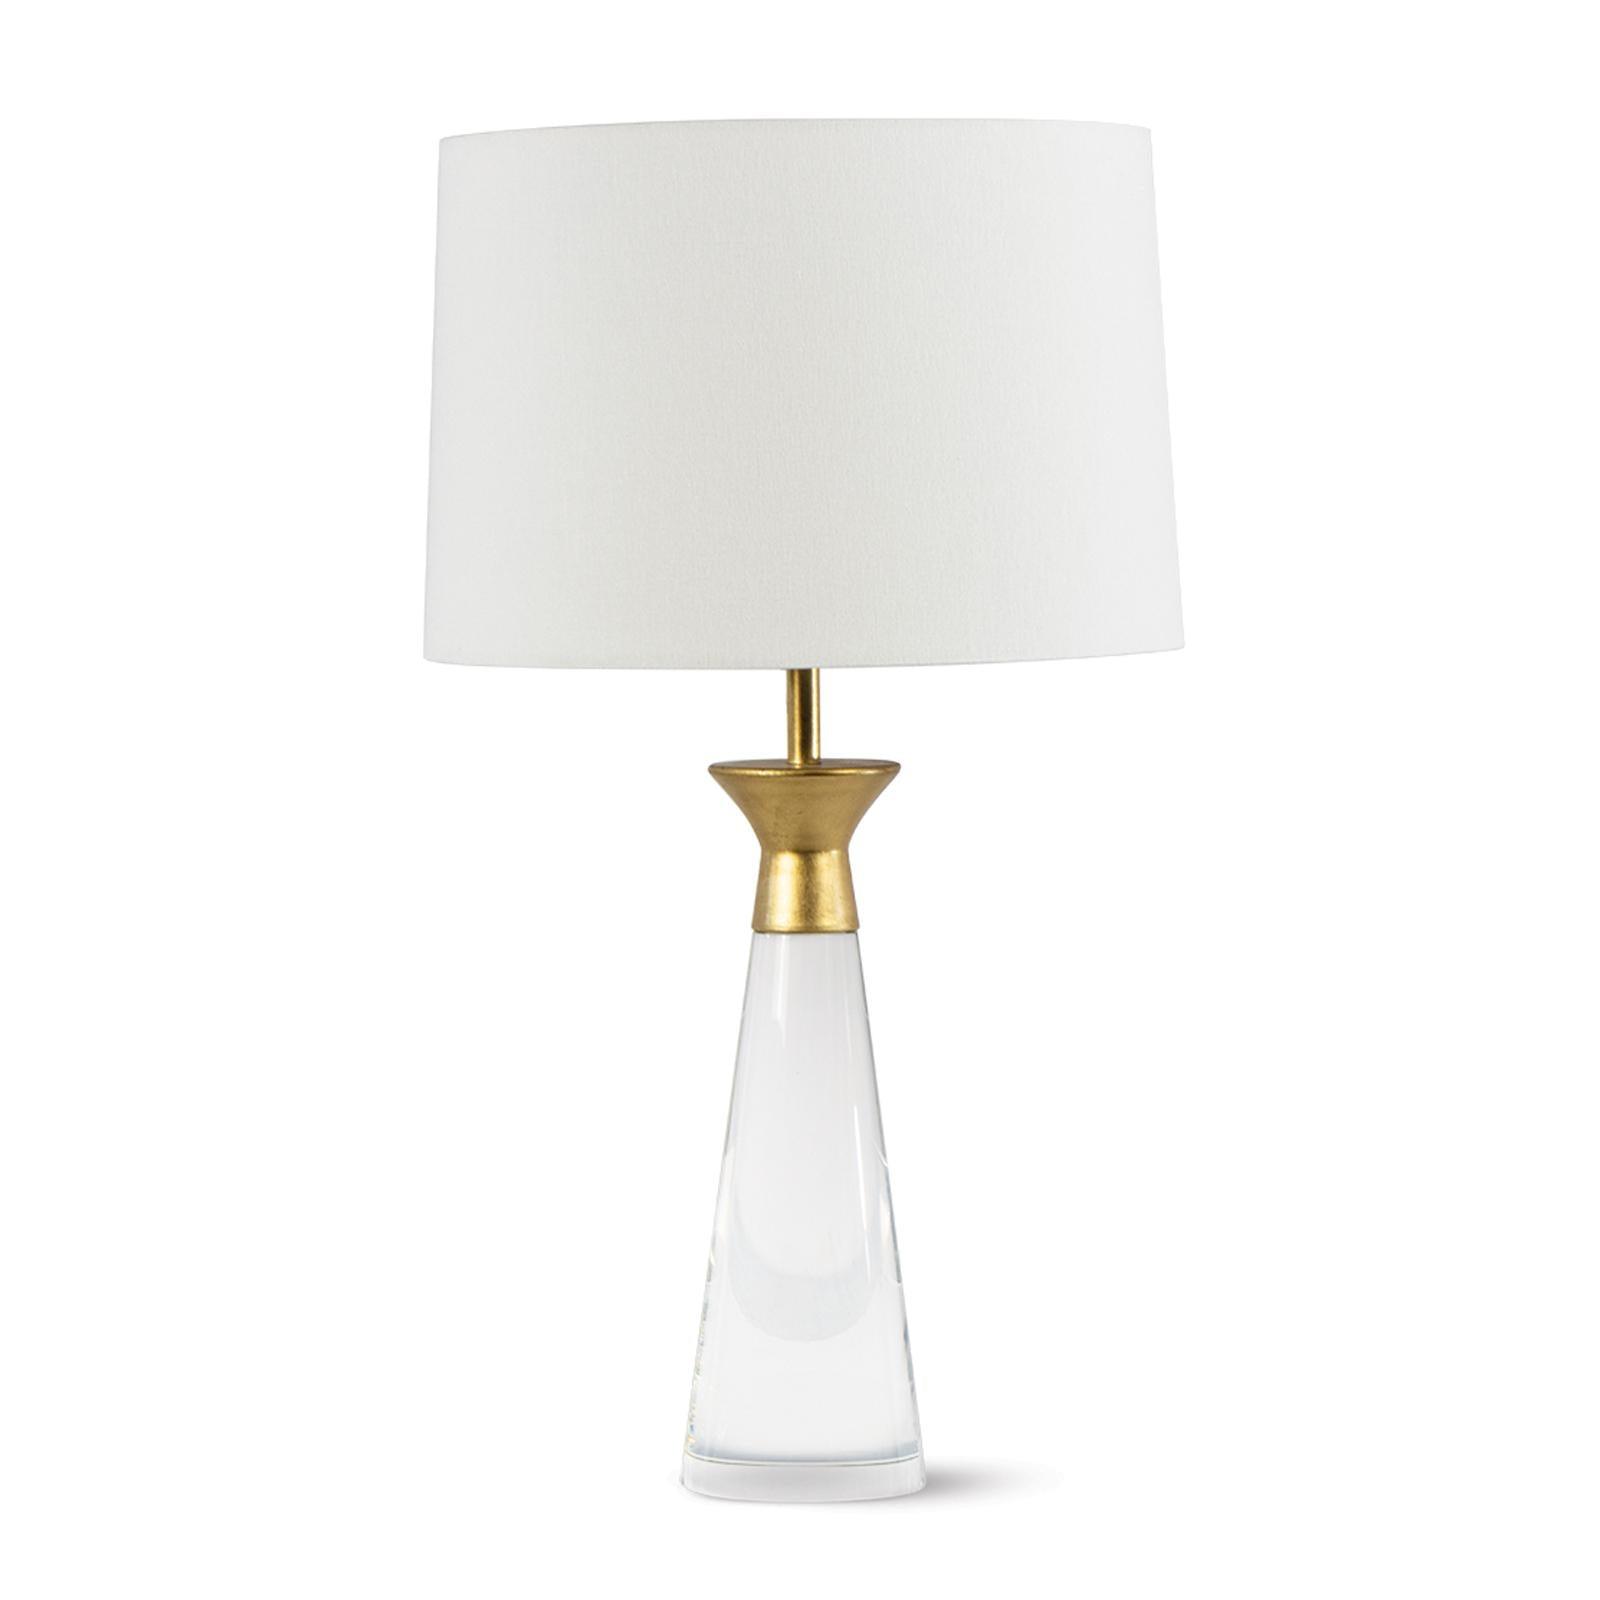 Regina Andrew - Southern Living Starling Crystal Table Lamp - 13-1486 | Montreal Lighting & Hardware